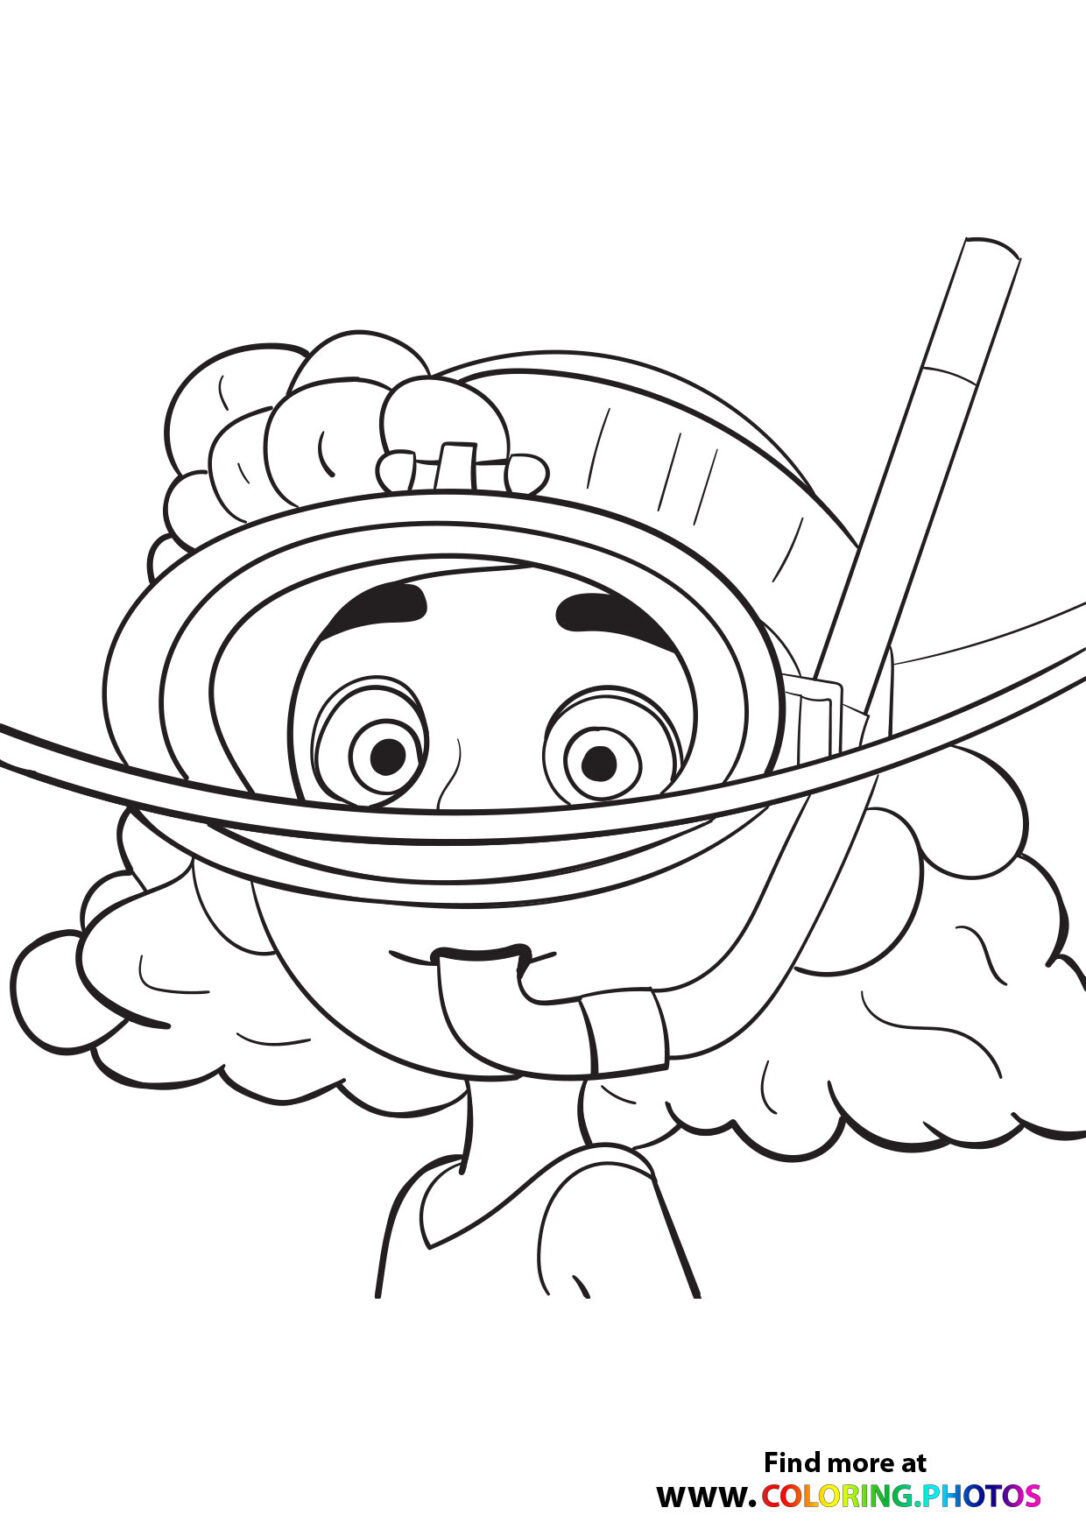 Cute Luca portrait - Coloring Pages for kids